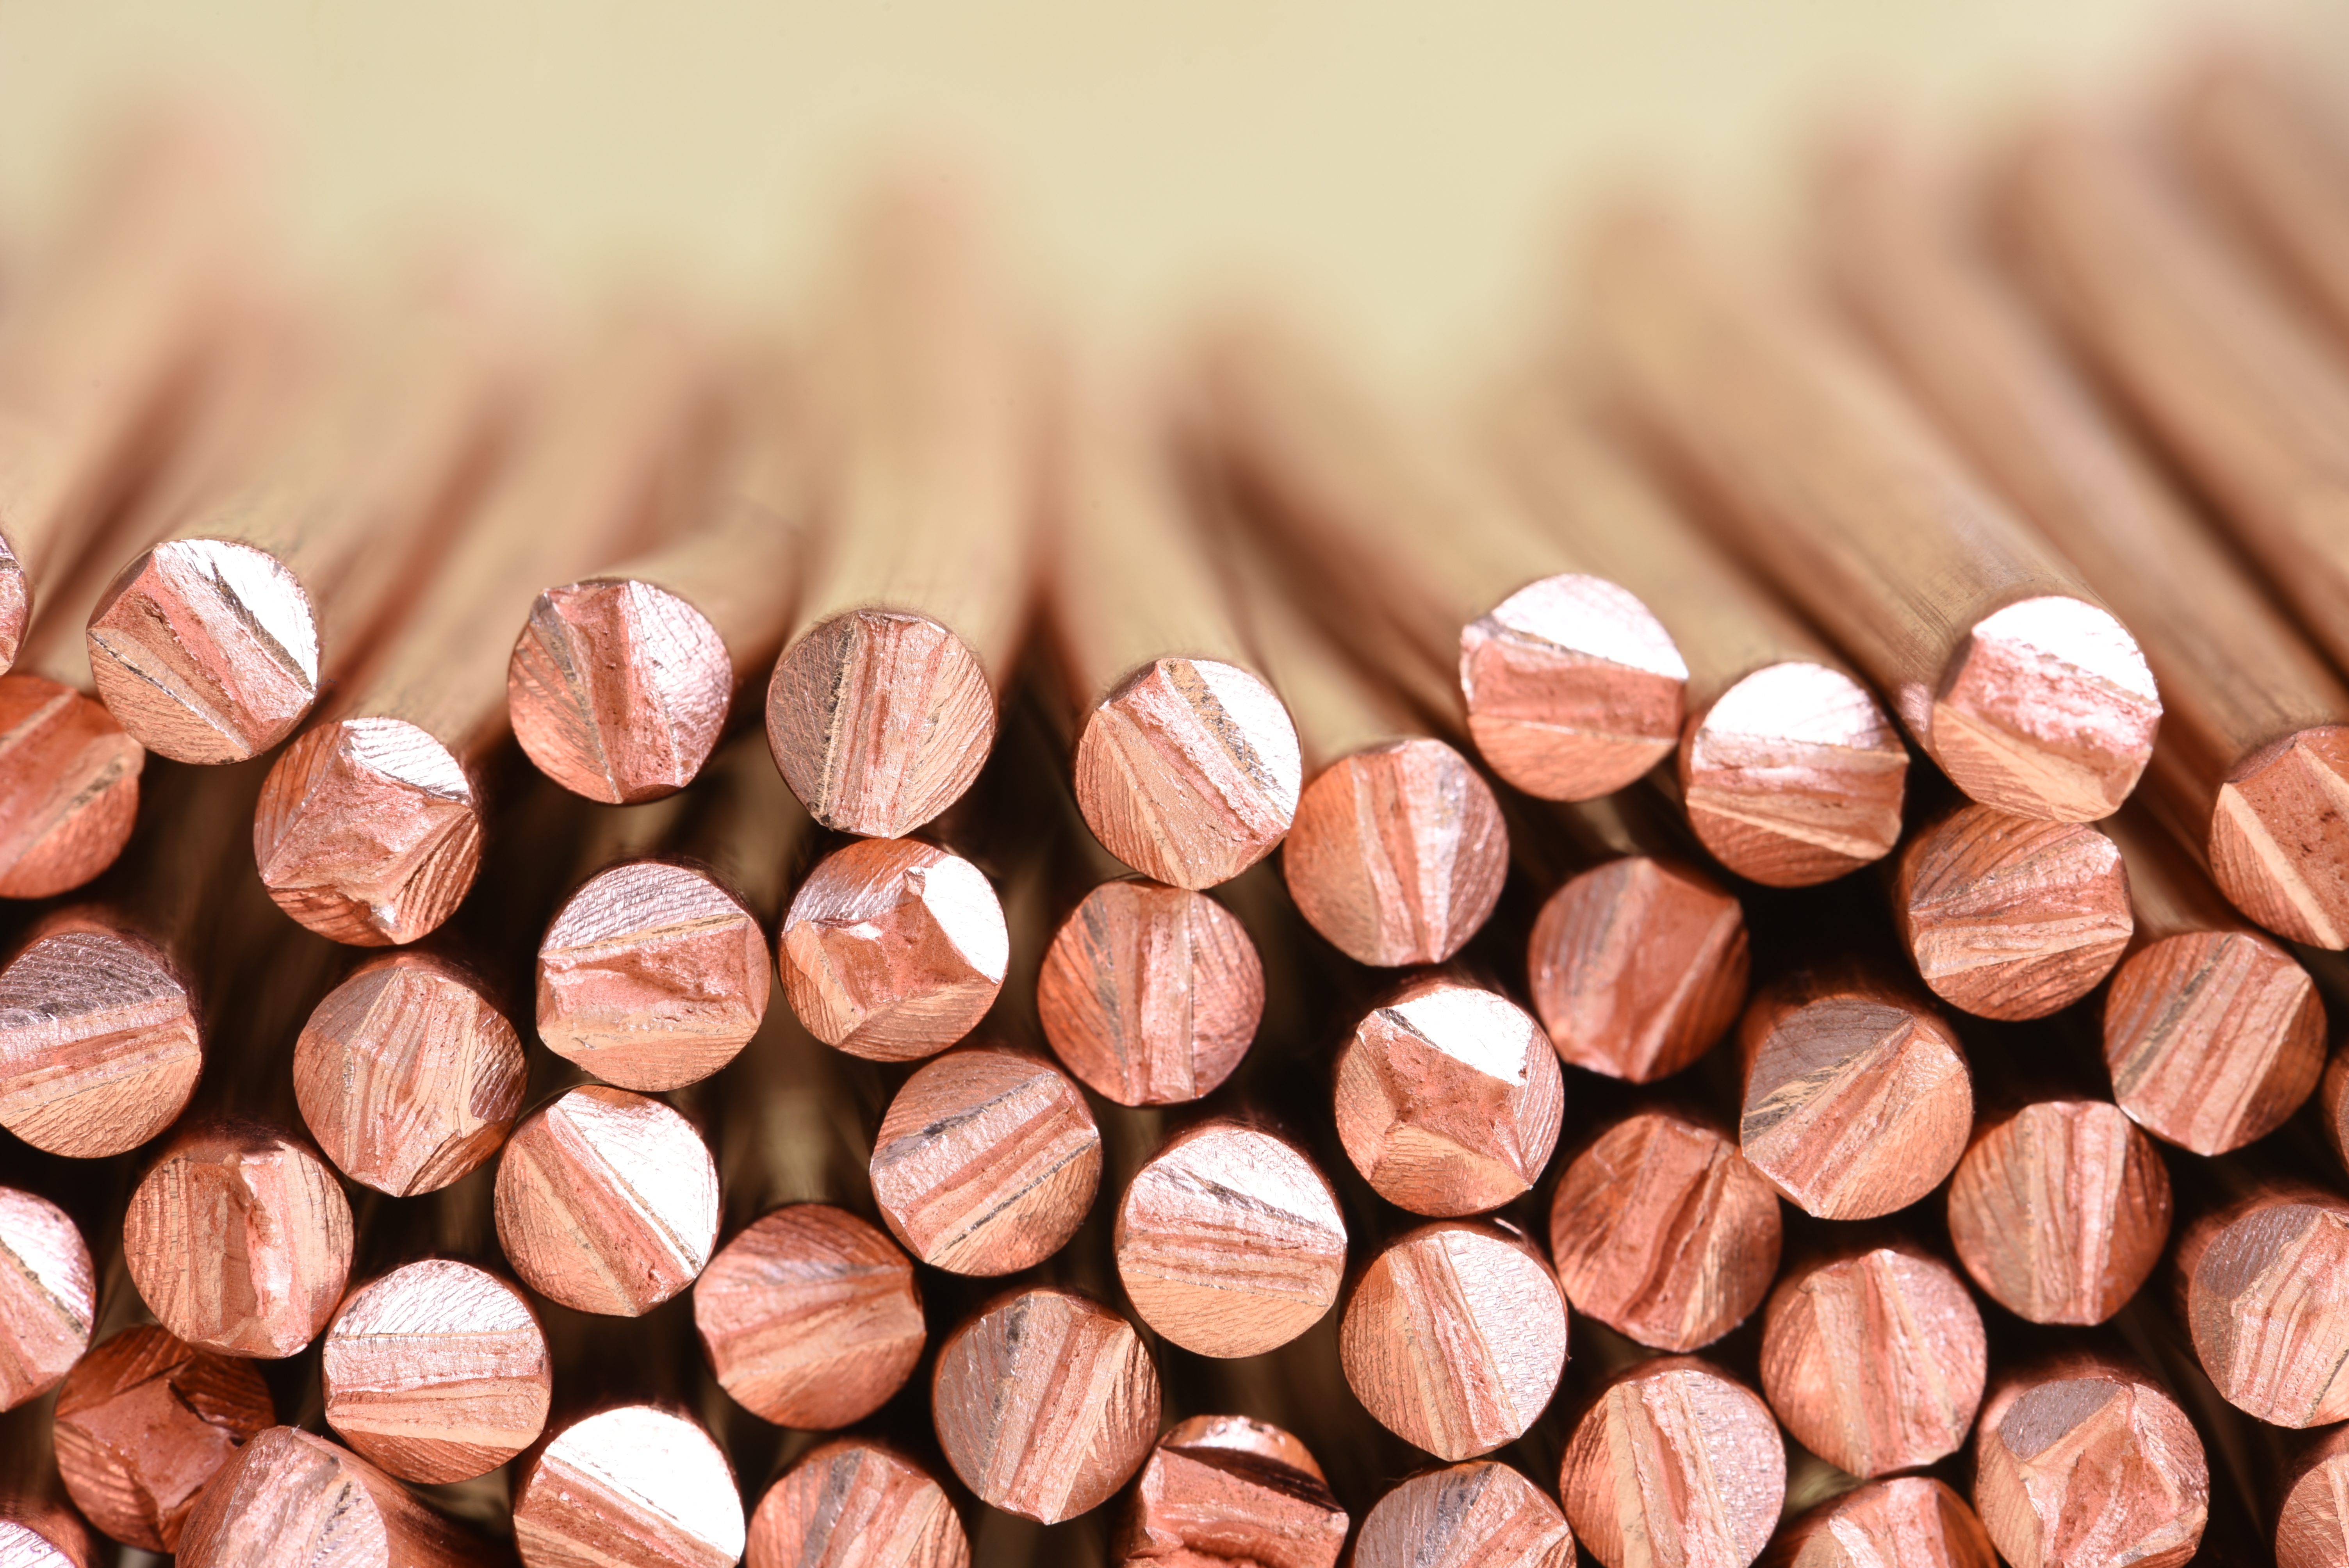 Copper prices, news and analysis